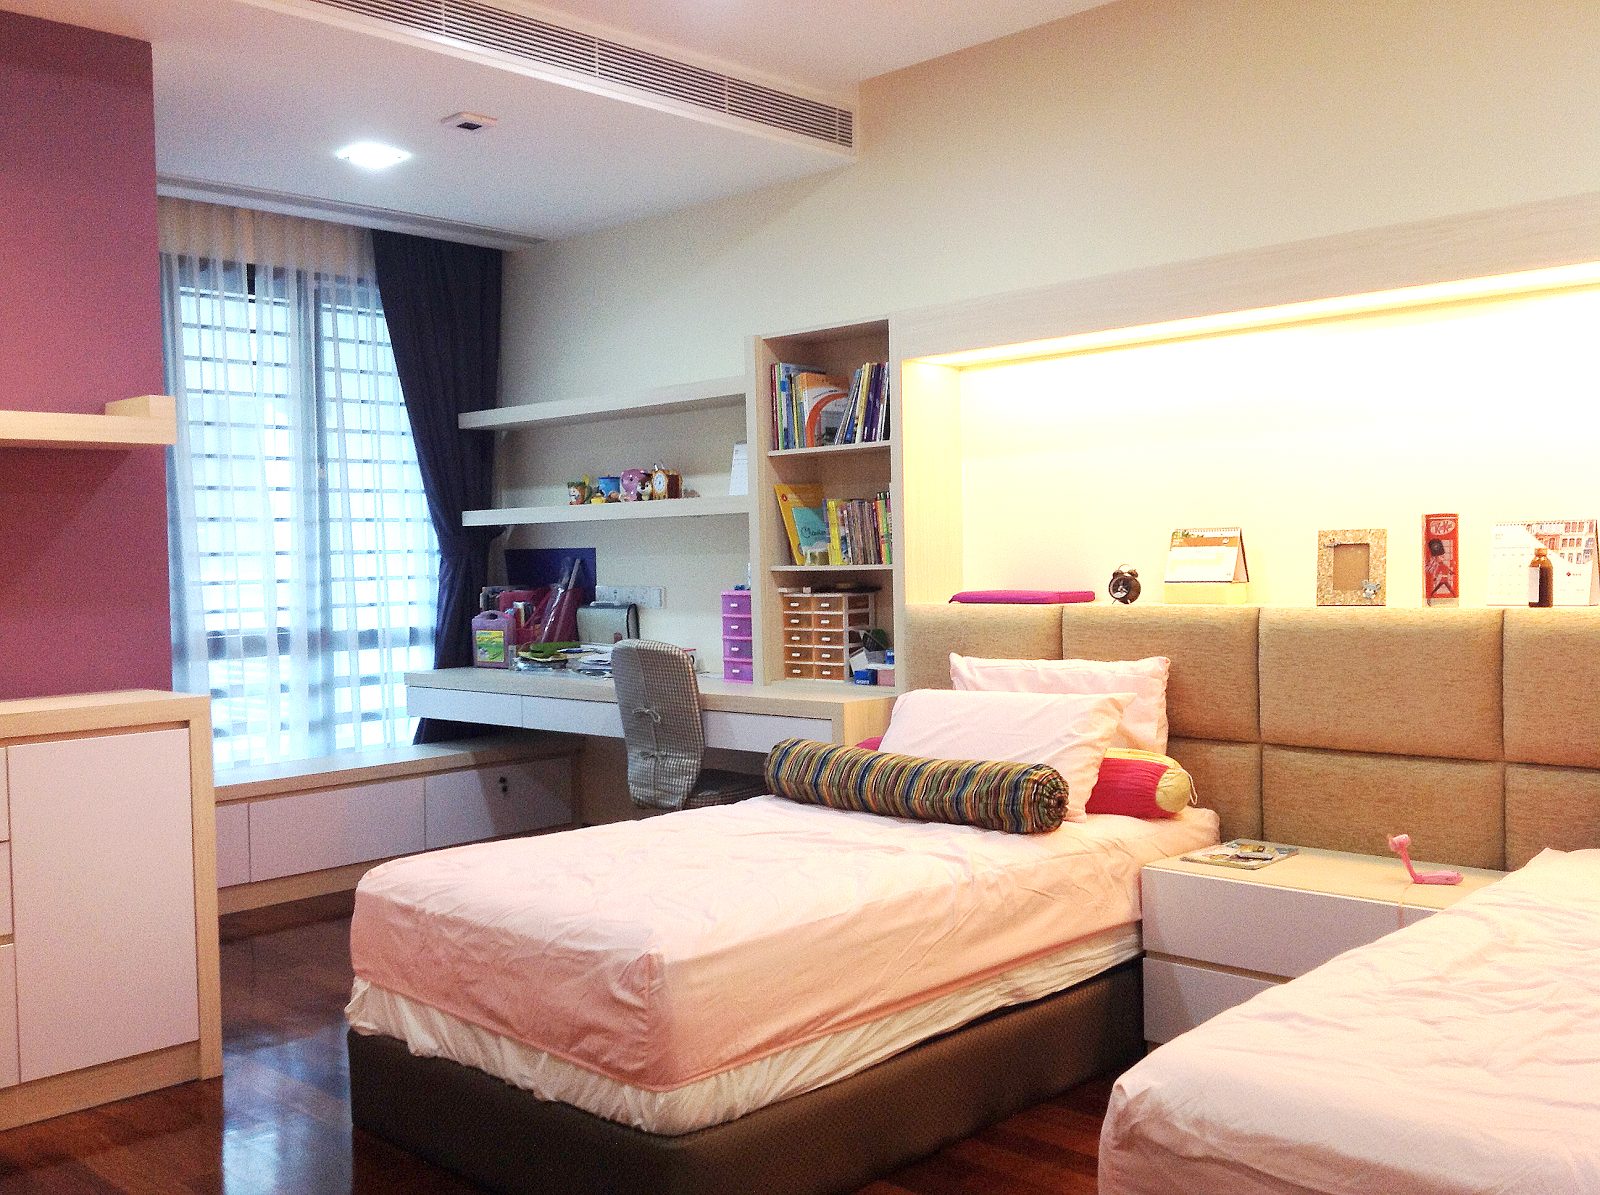 Teenager's bedroom design with integrated study area and display area above the beds in Bandar Kinrara 9, Puchong